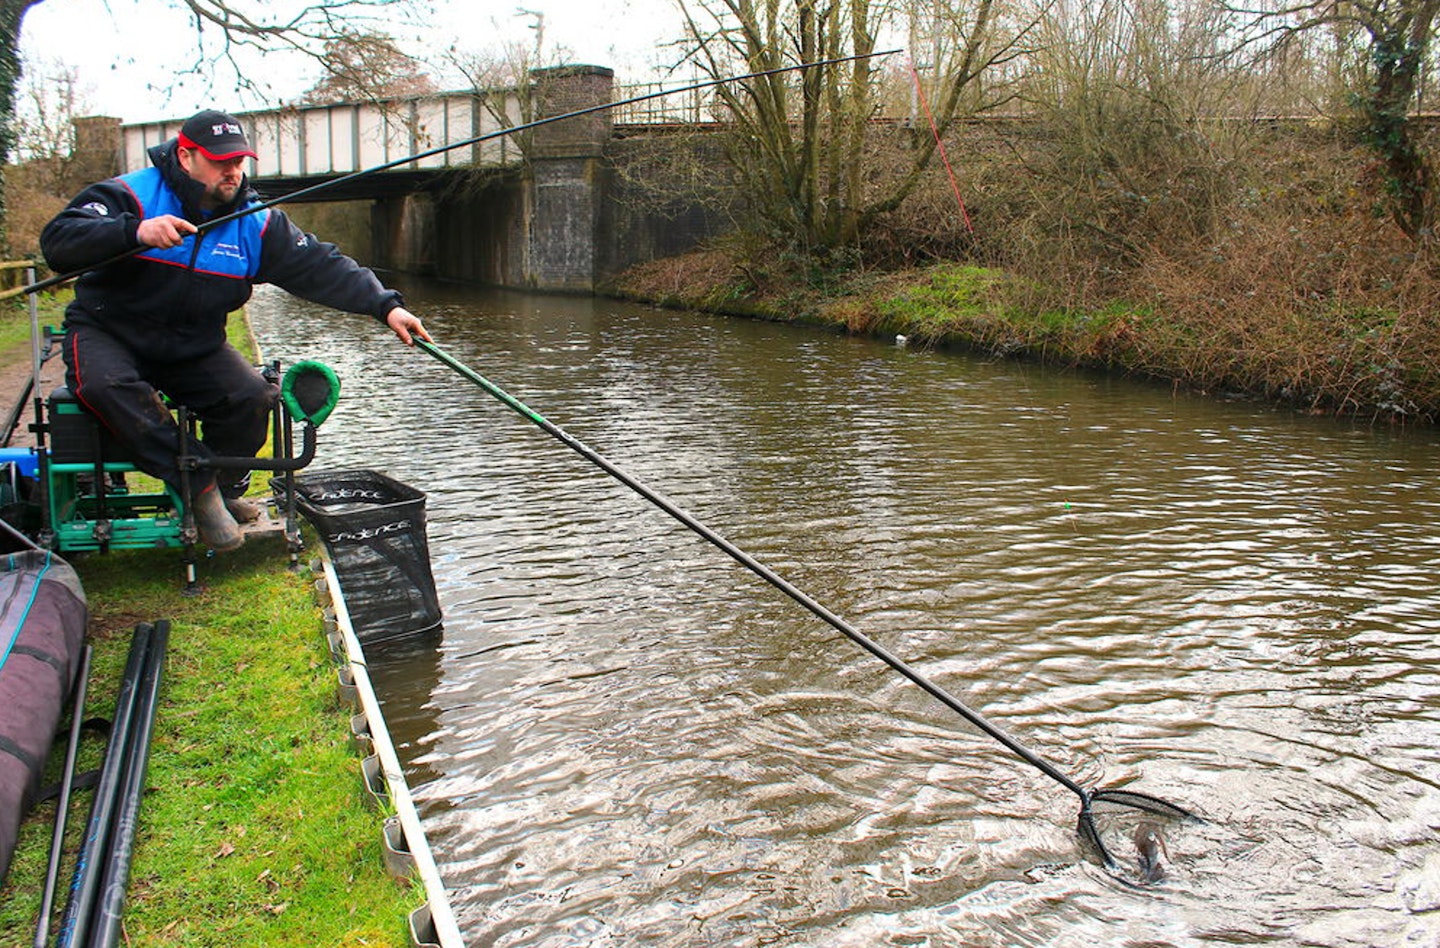 Pole fishing for big canal fish